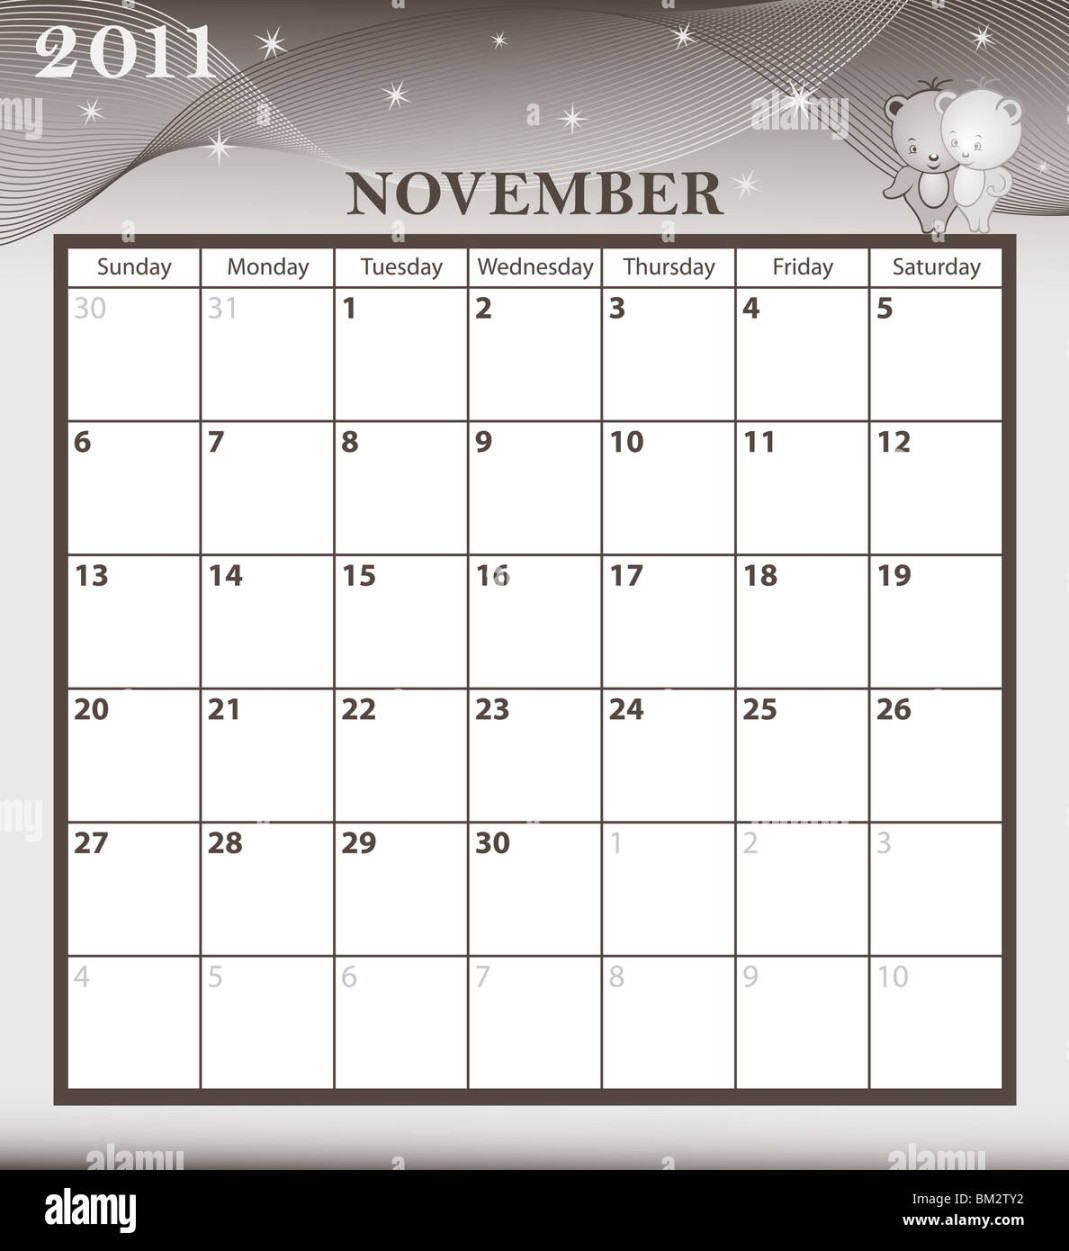 Calendar  November month with large date boxes